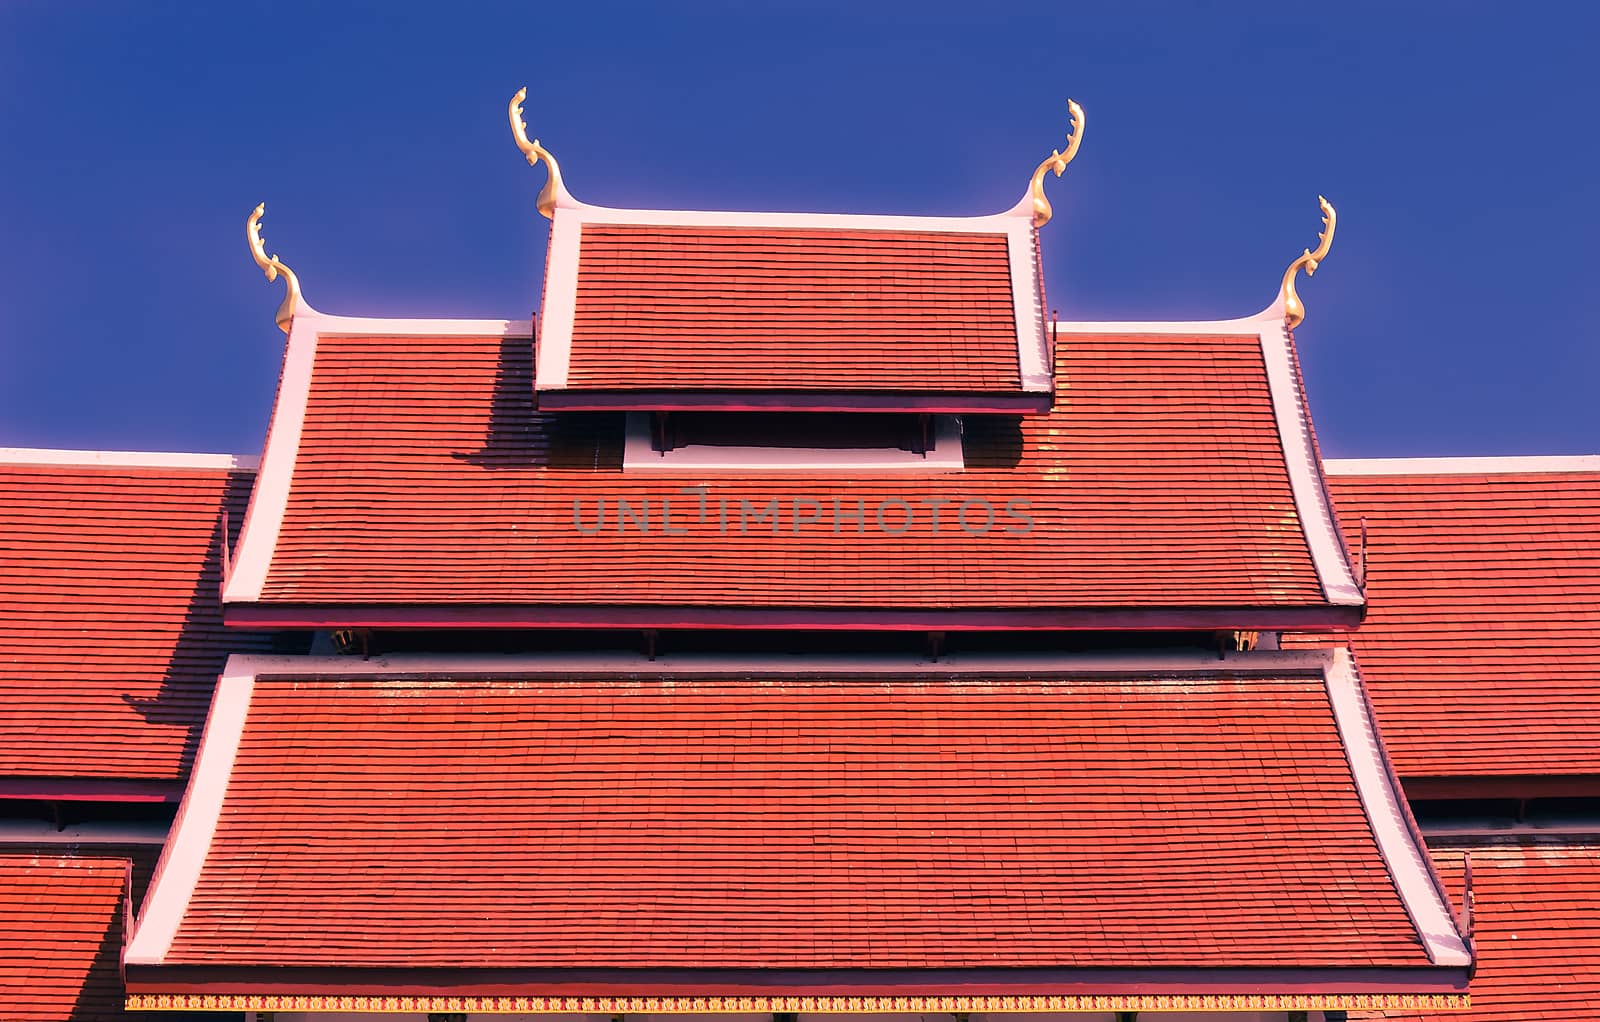 The red tile roof is the architecture of Buddhist temple.It has Naga structure on gable and ornemental roof points shaped like the head of the Garuda (snake).